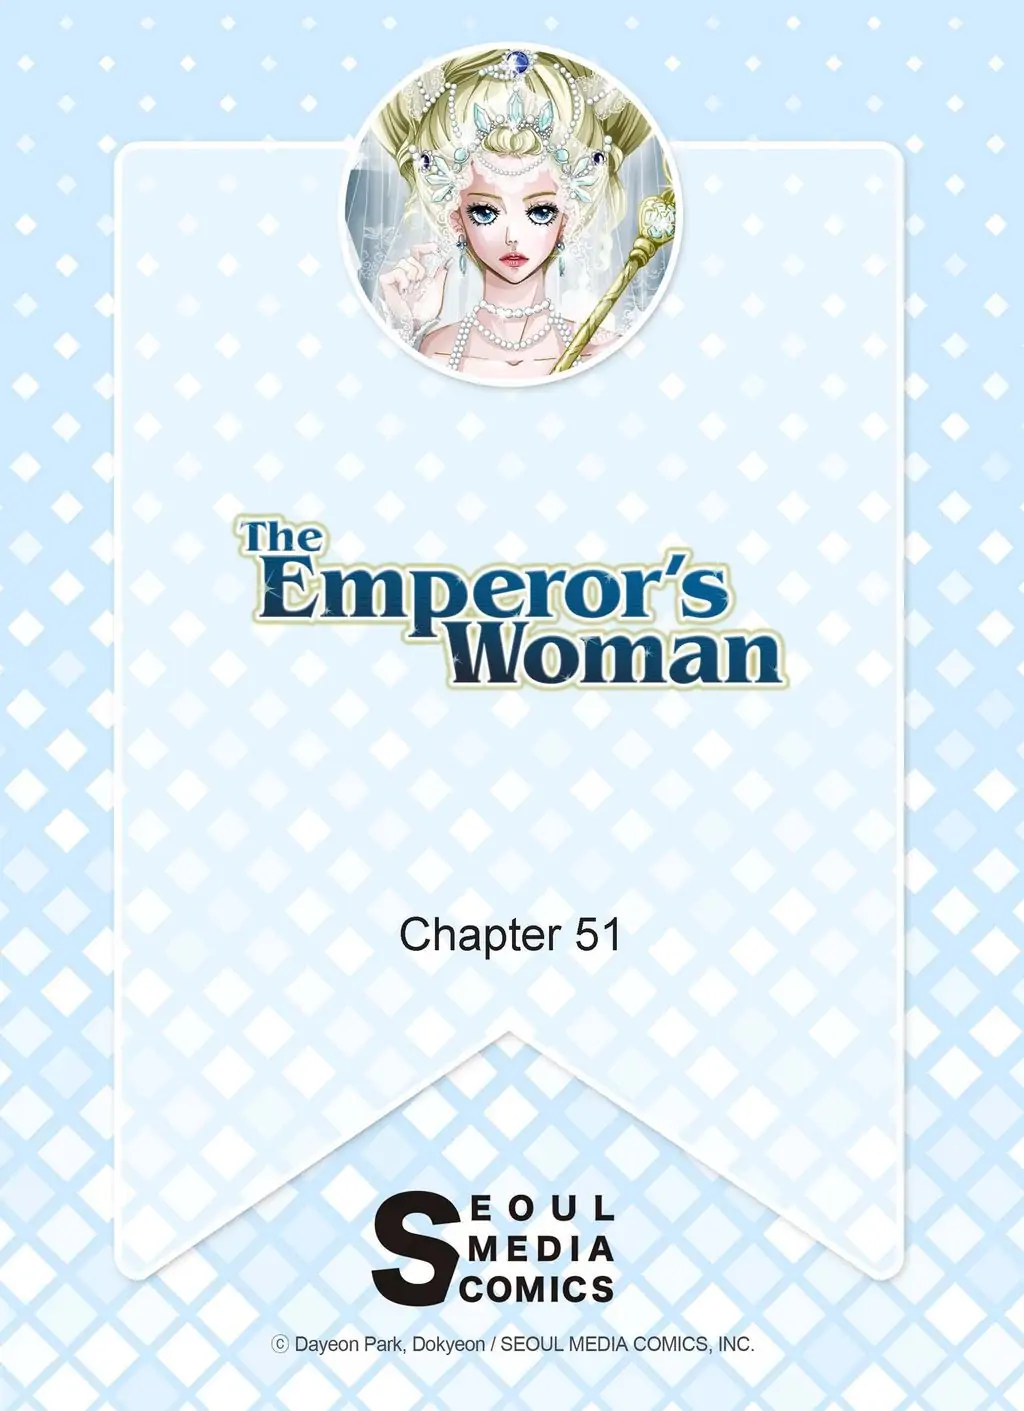 The Emperor’s Woman chapter 51